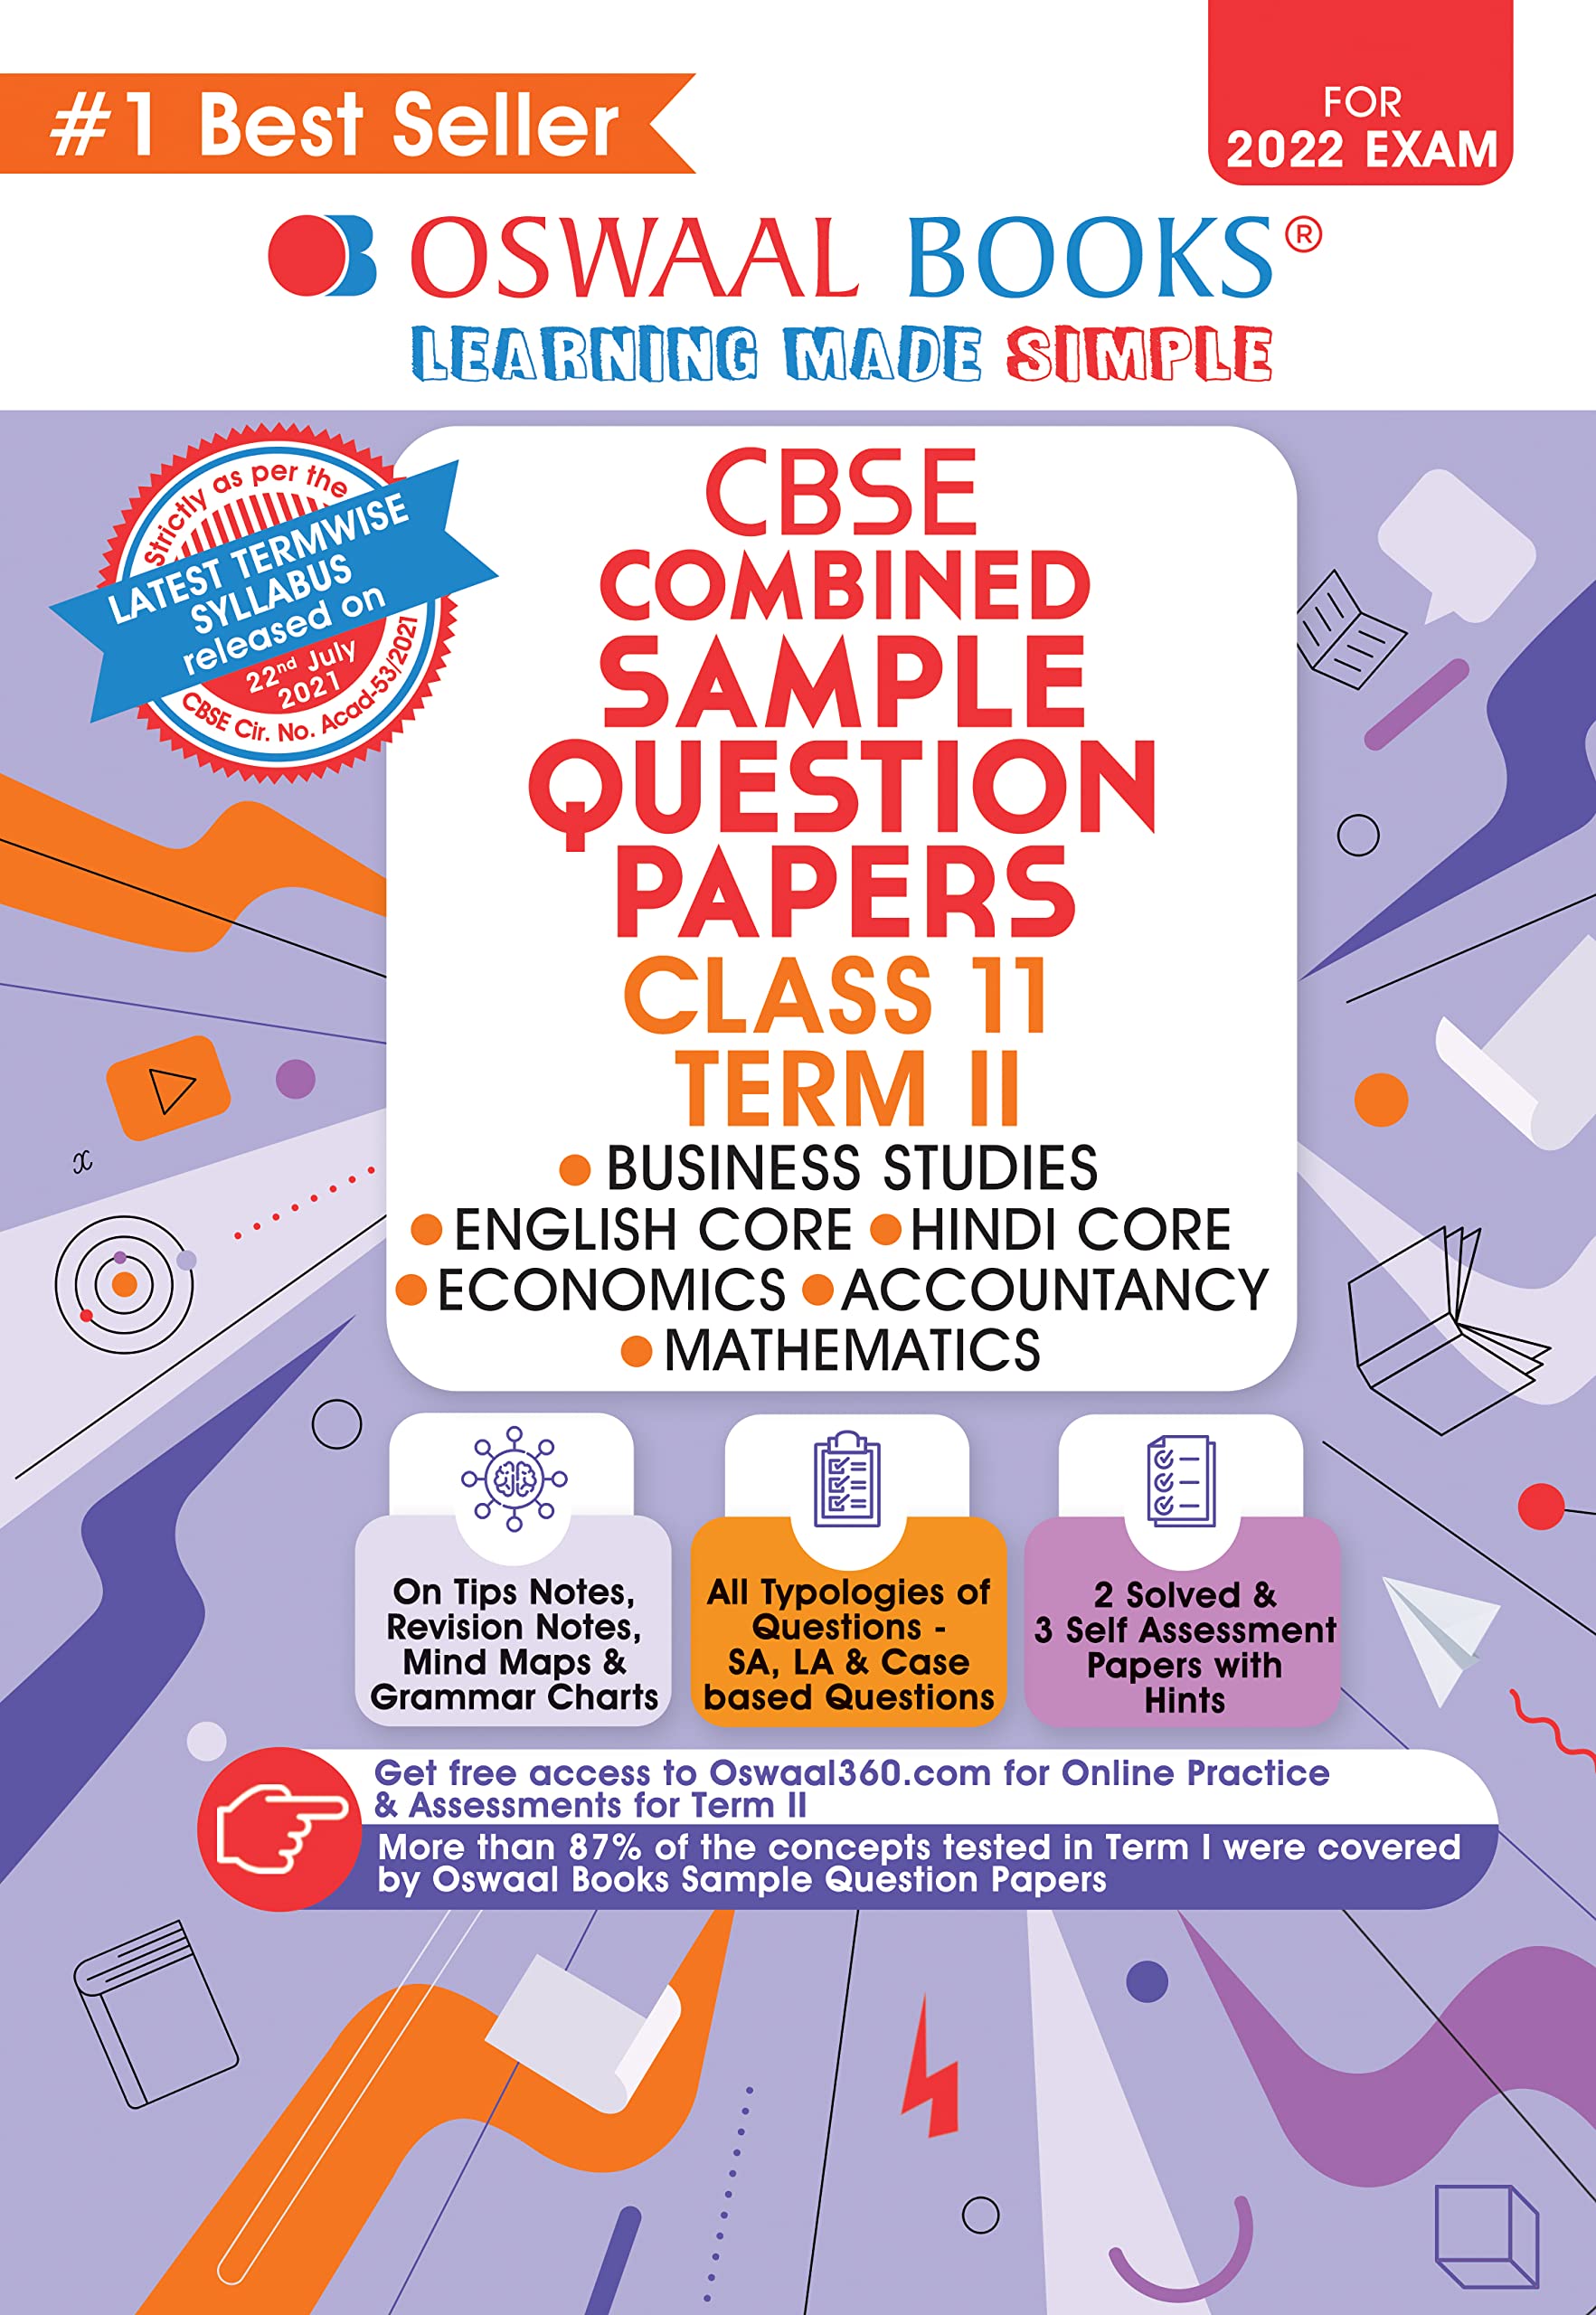 Oswaal CBSE Term 2 English Core, Hindi Core, Accounts, Mathematics, Economics, Business Studies Class 11 Combined Sample Question Paper Book (For Term-2 2022 Exam)